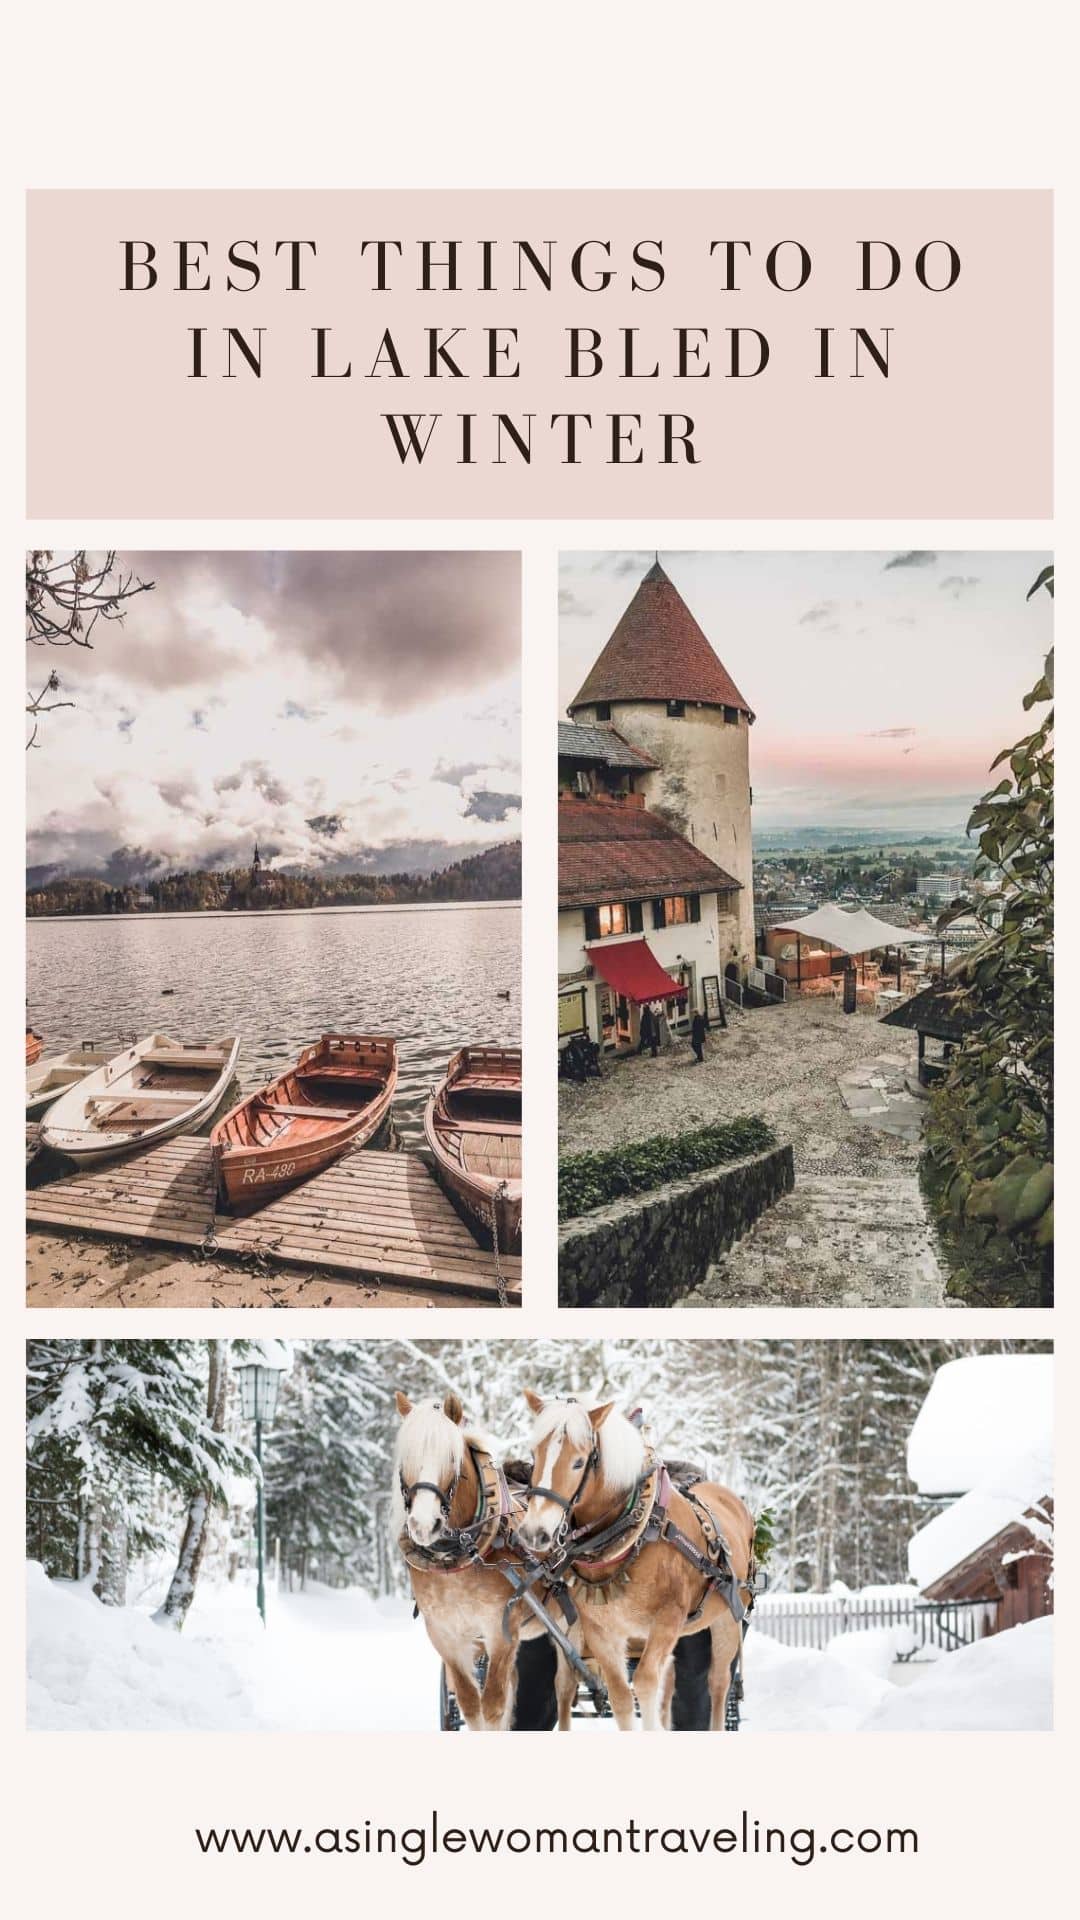 A collage of winter activities at Lake Bled, including wooden boats on the shore, a snowy path leading to a castle, and a horse-drawn sleigh on a snow-covered trail.